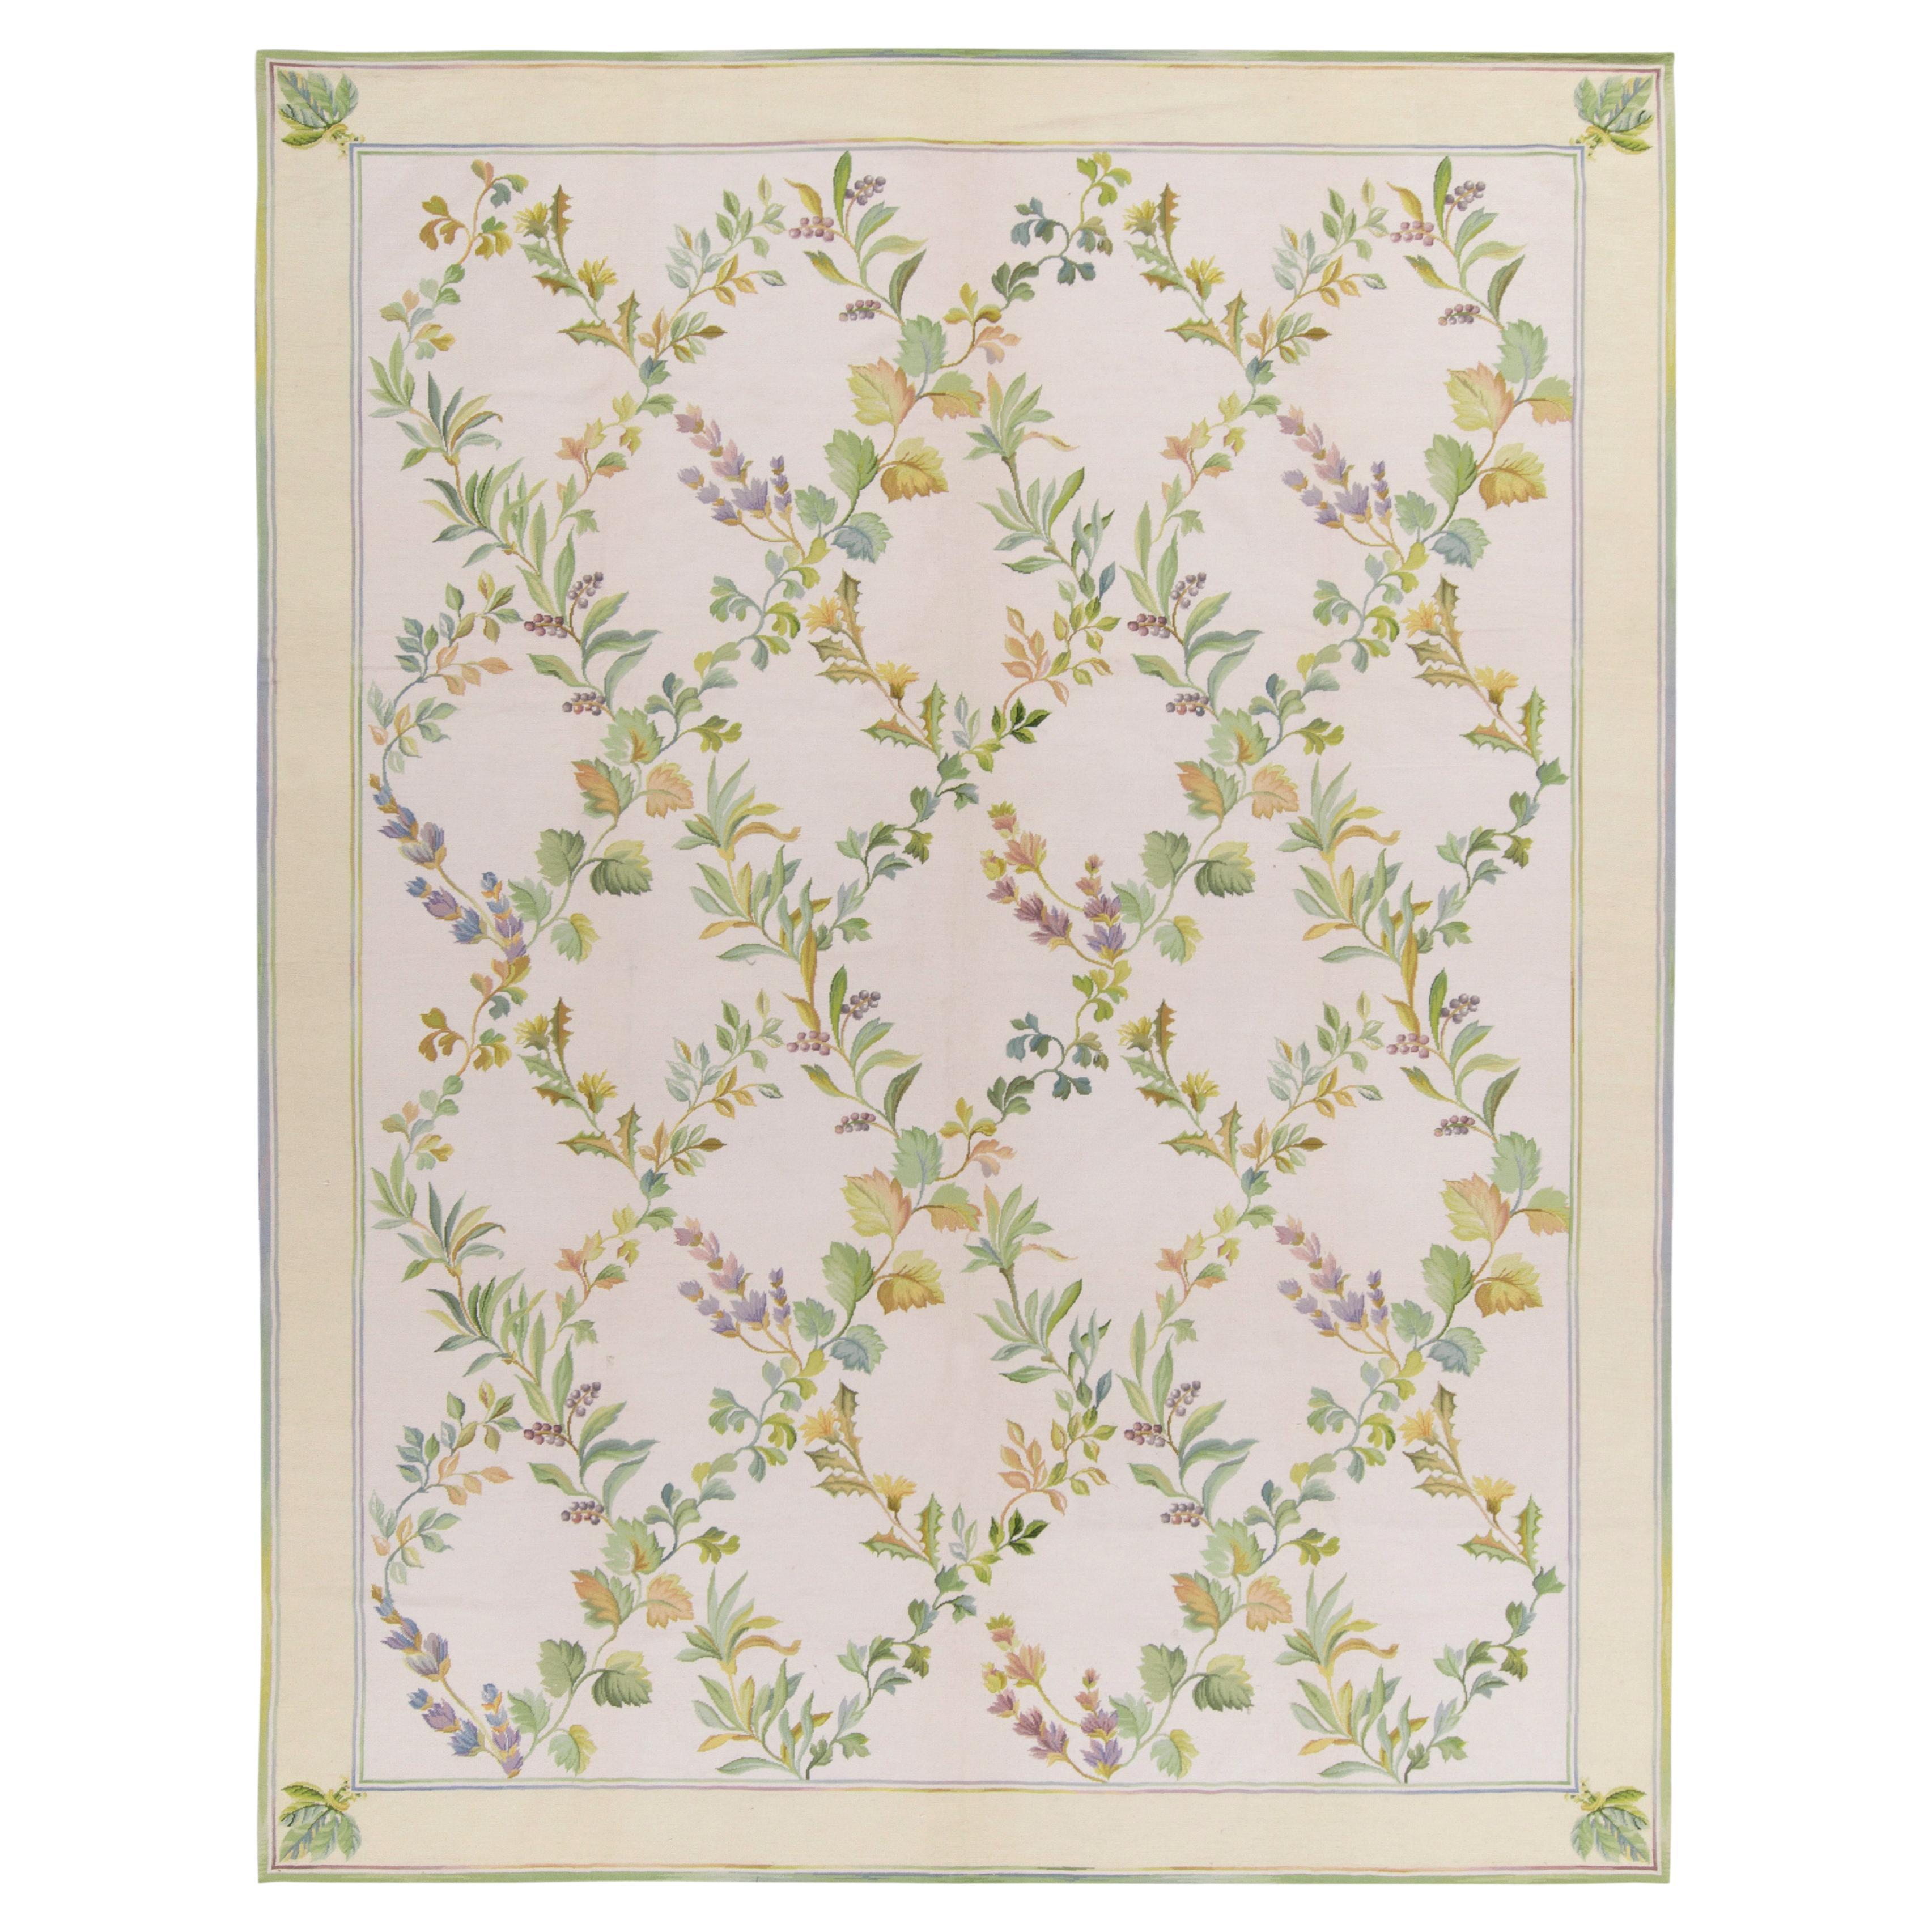 Rug & Kilim's Contemporary Needlepoint rug in Green, Golden, Lilac Florals